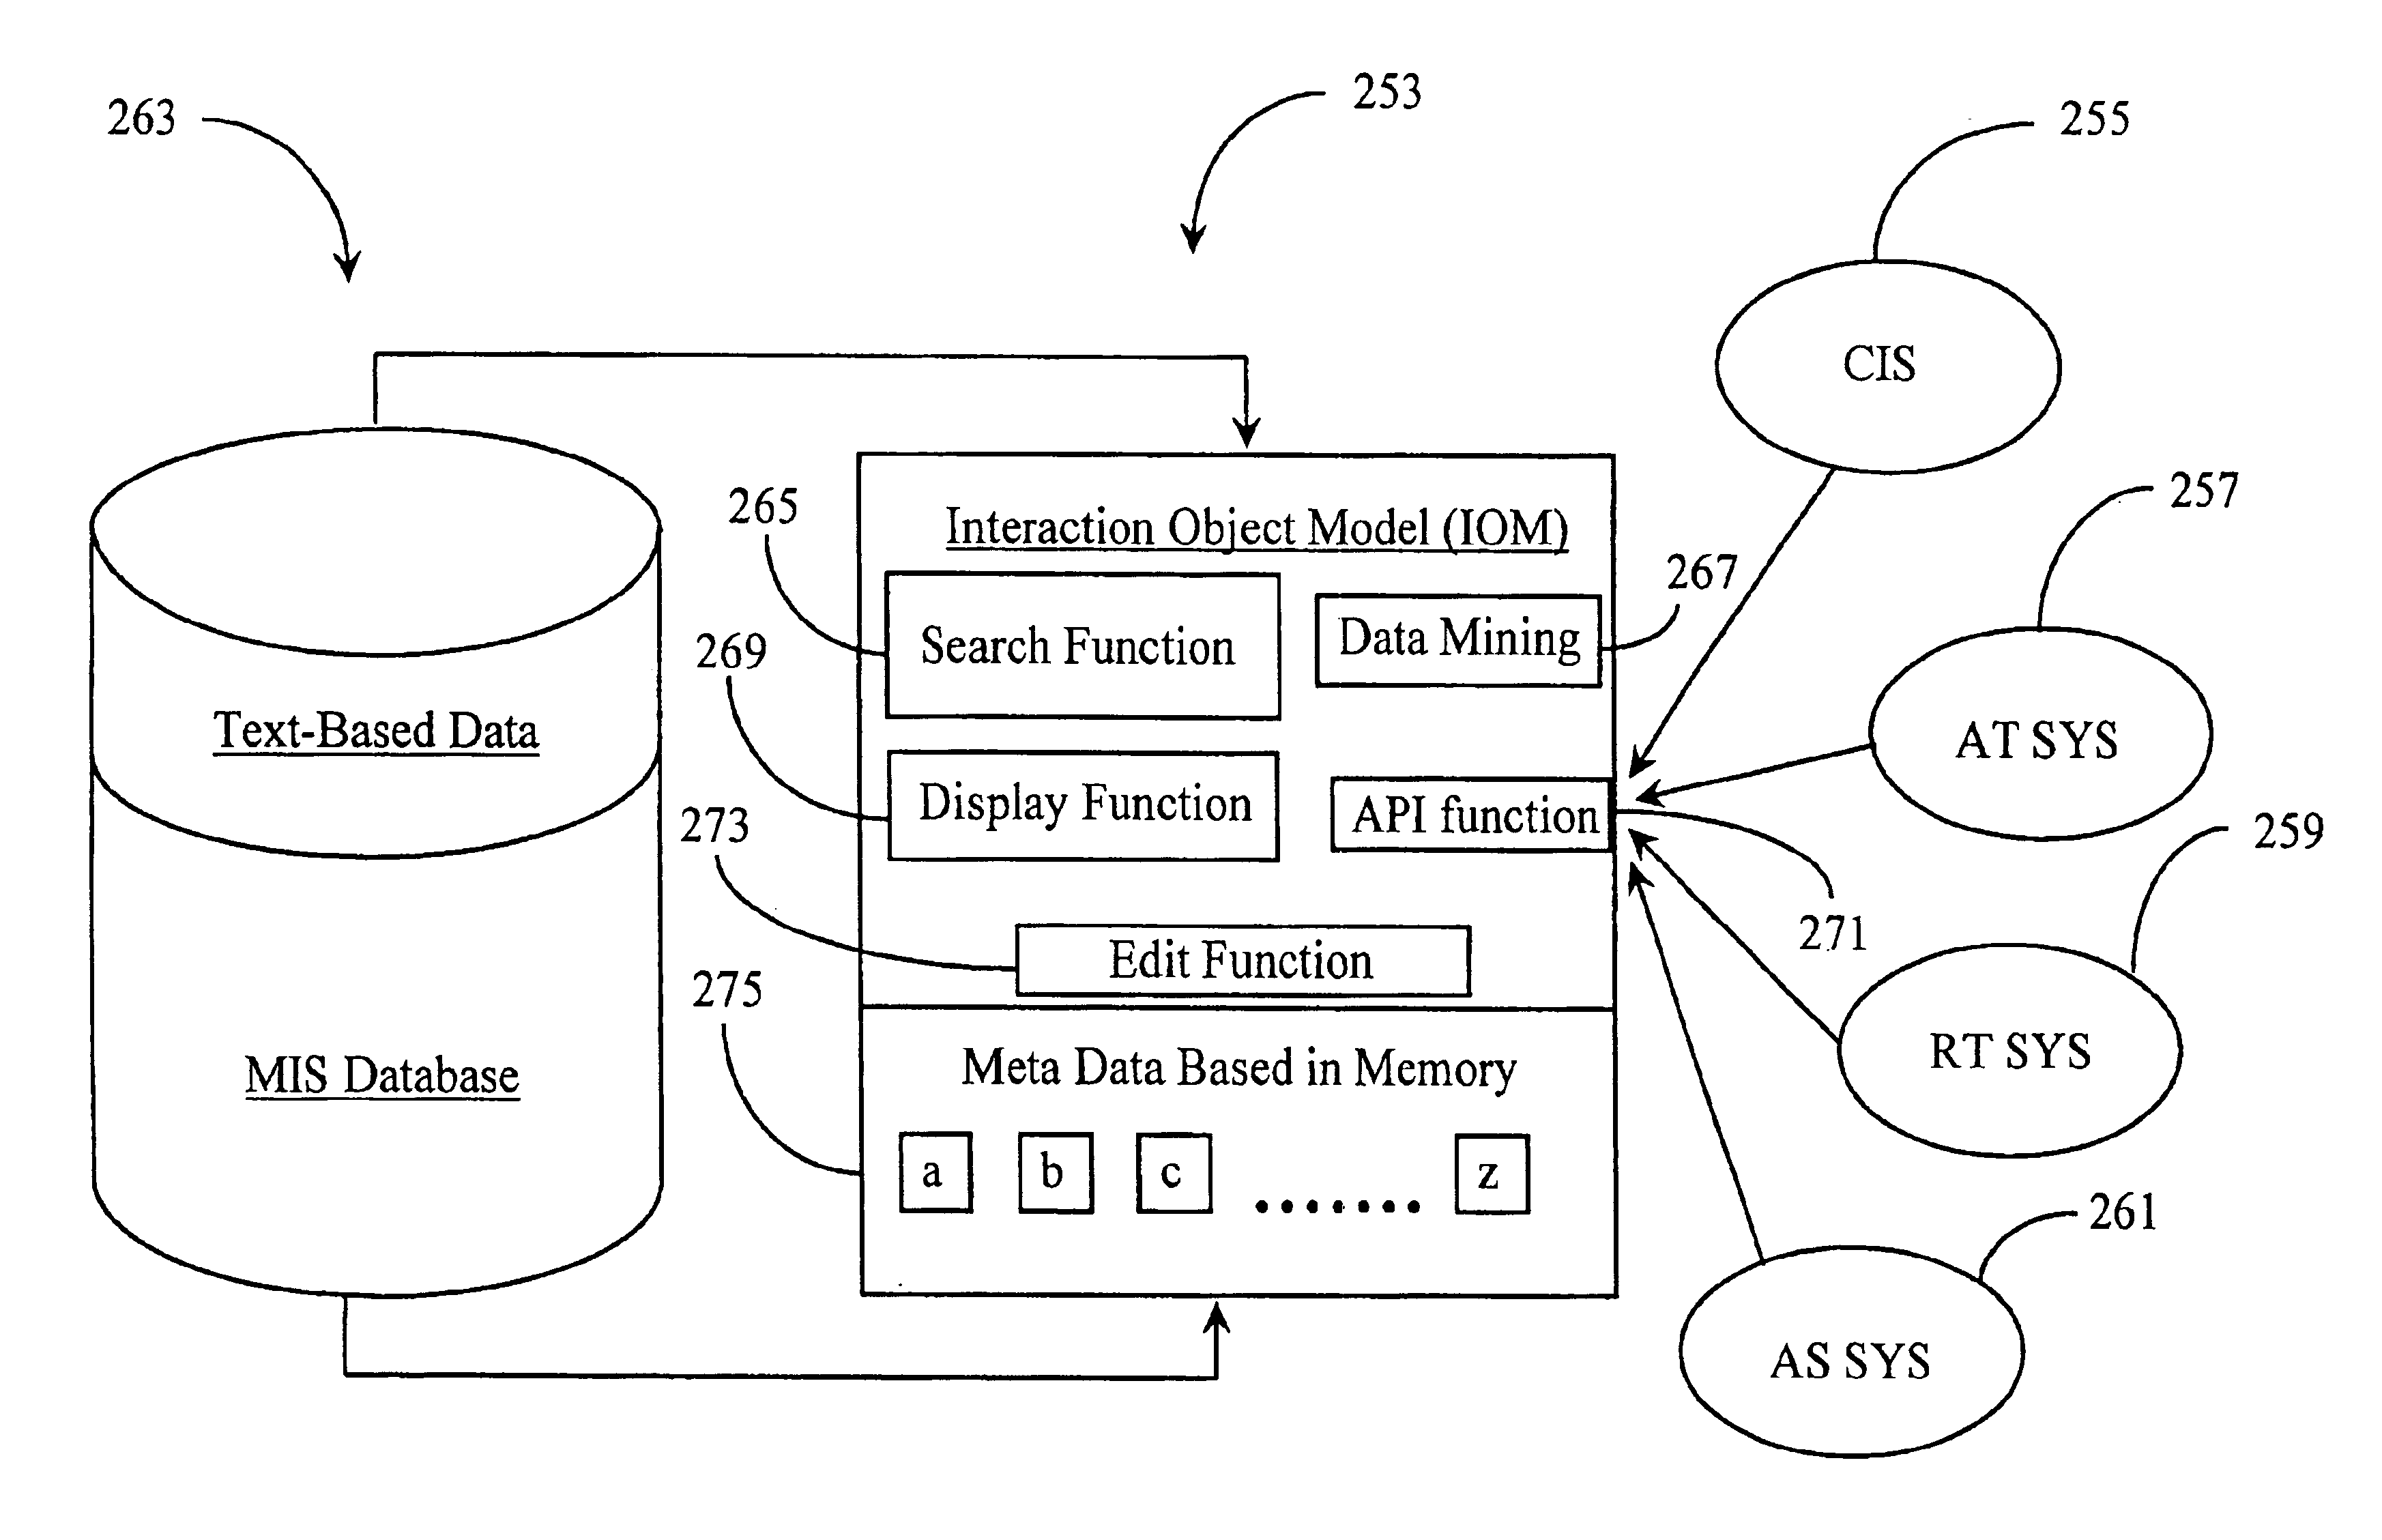 Stored-media interface engine providing an abstract record of stored multimedia files within a multimedia communication center